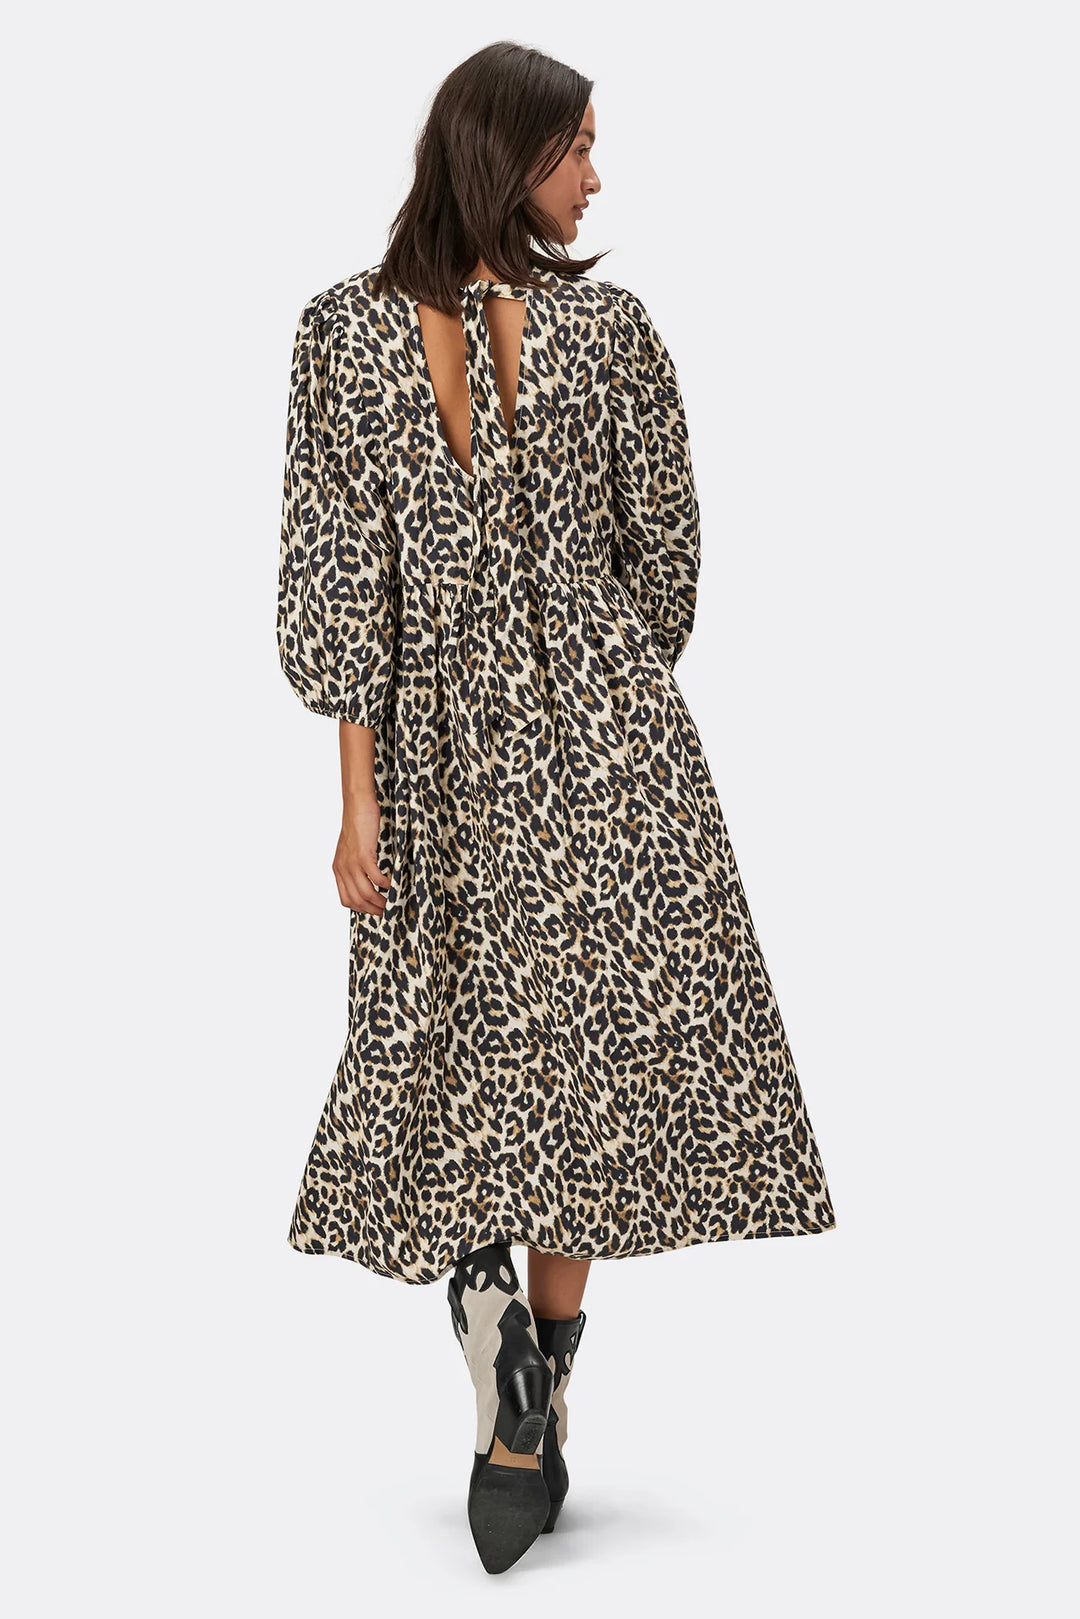 Lolly's Laundry Marion Dress Leopard